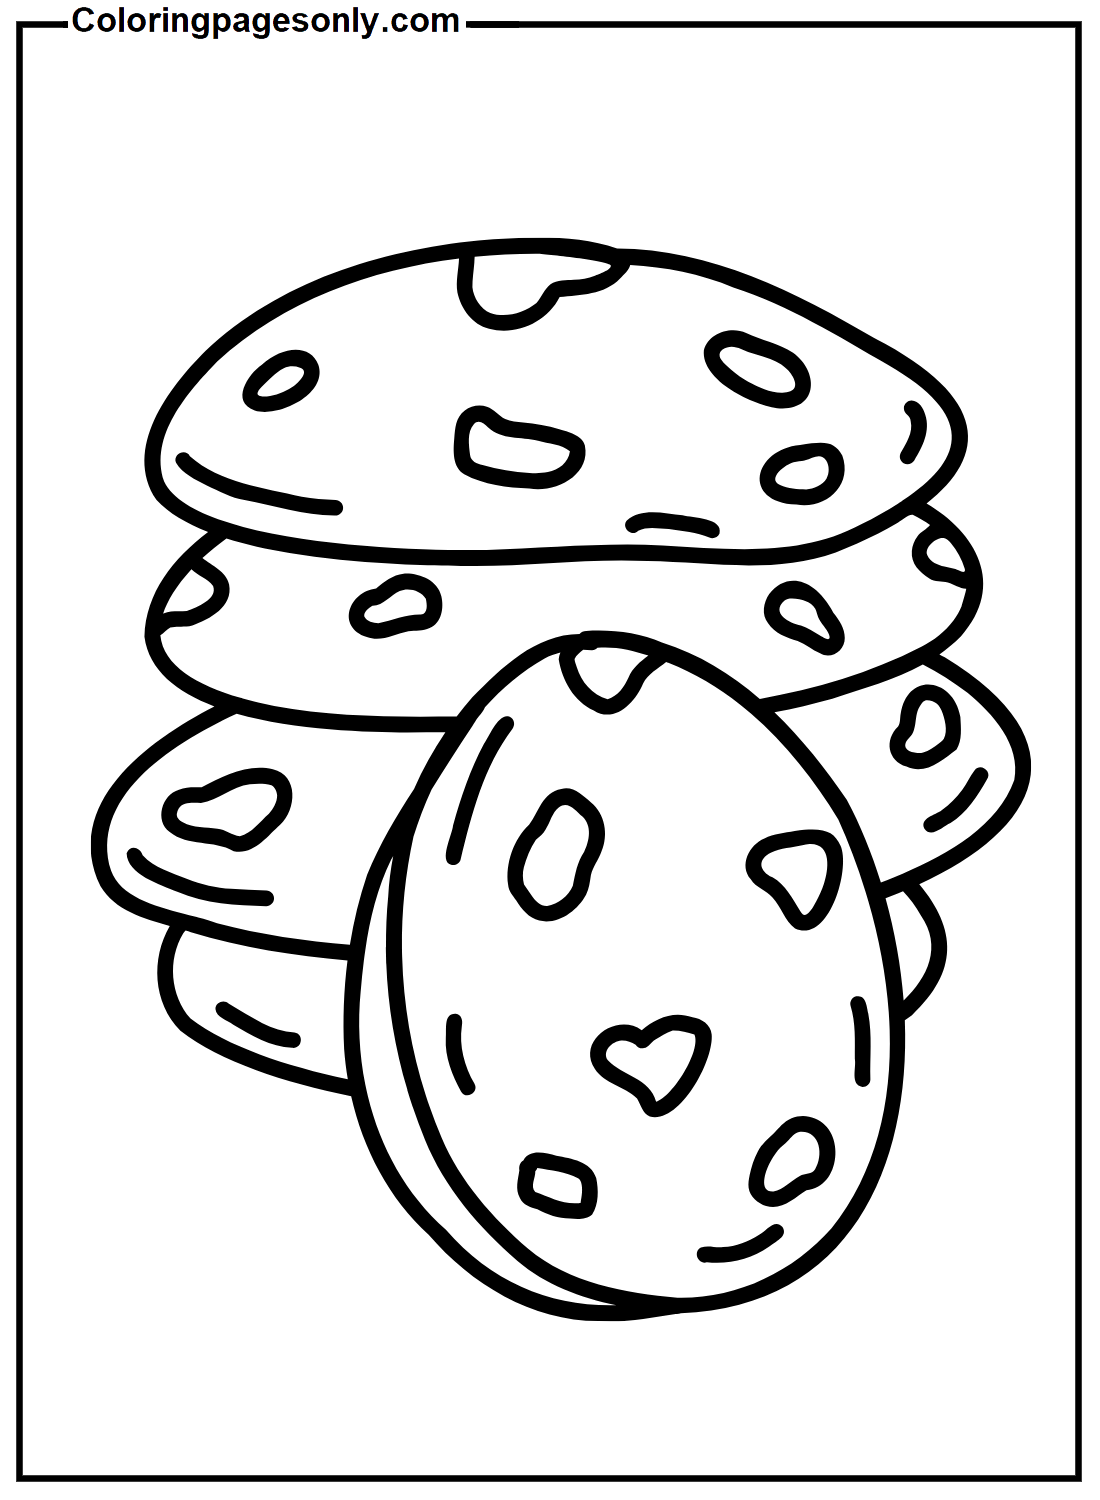 Cookie Image Coloring Pages